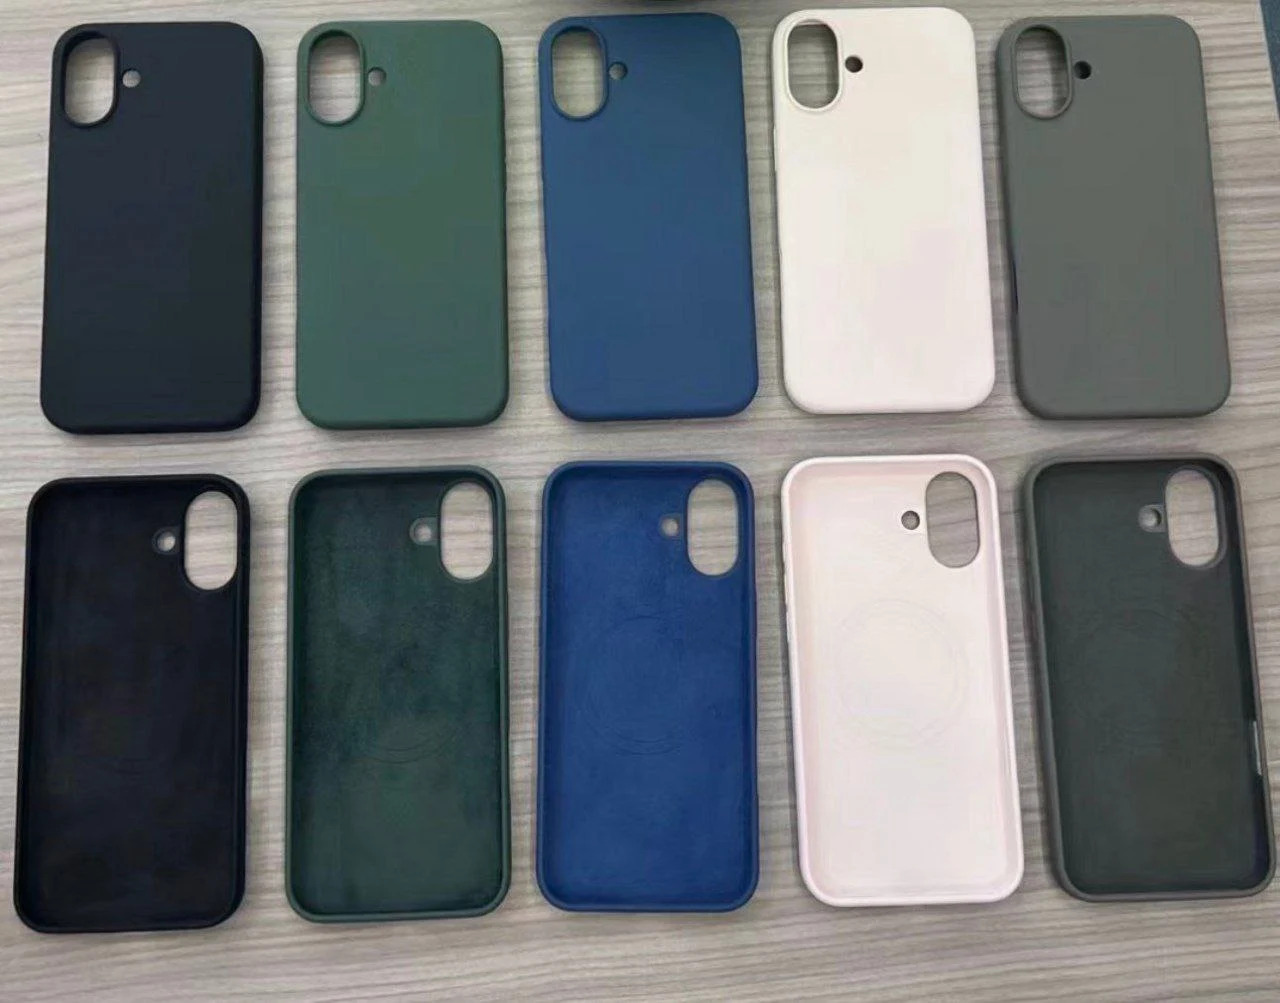 TechNetBook share images on iPhone 16 case cutouts